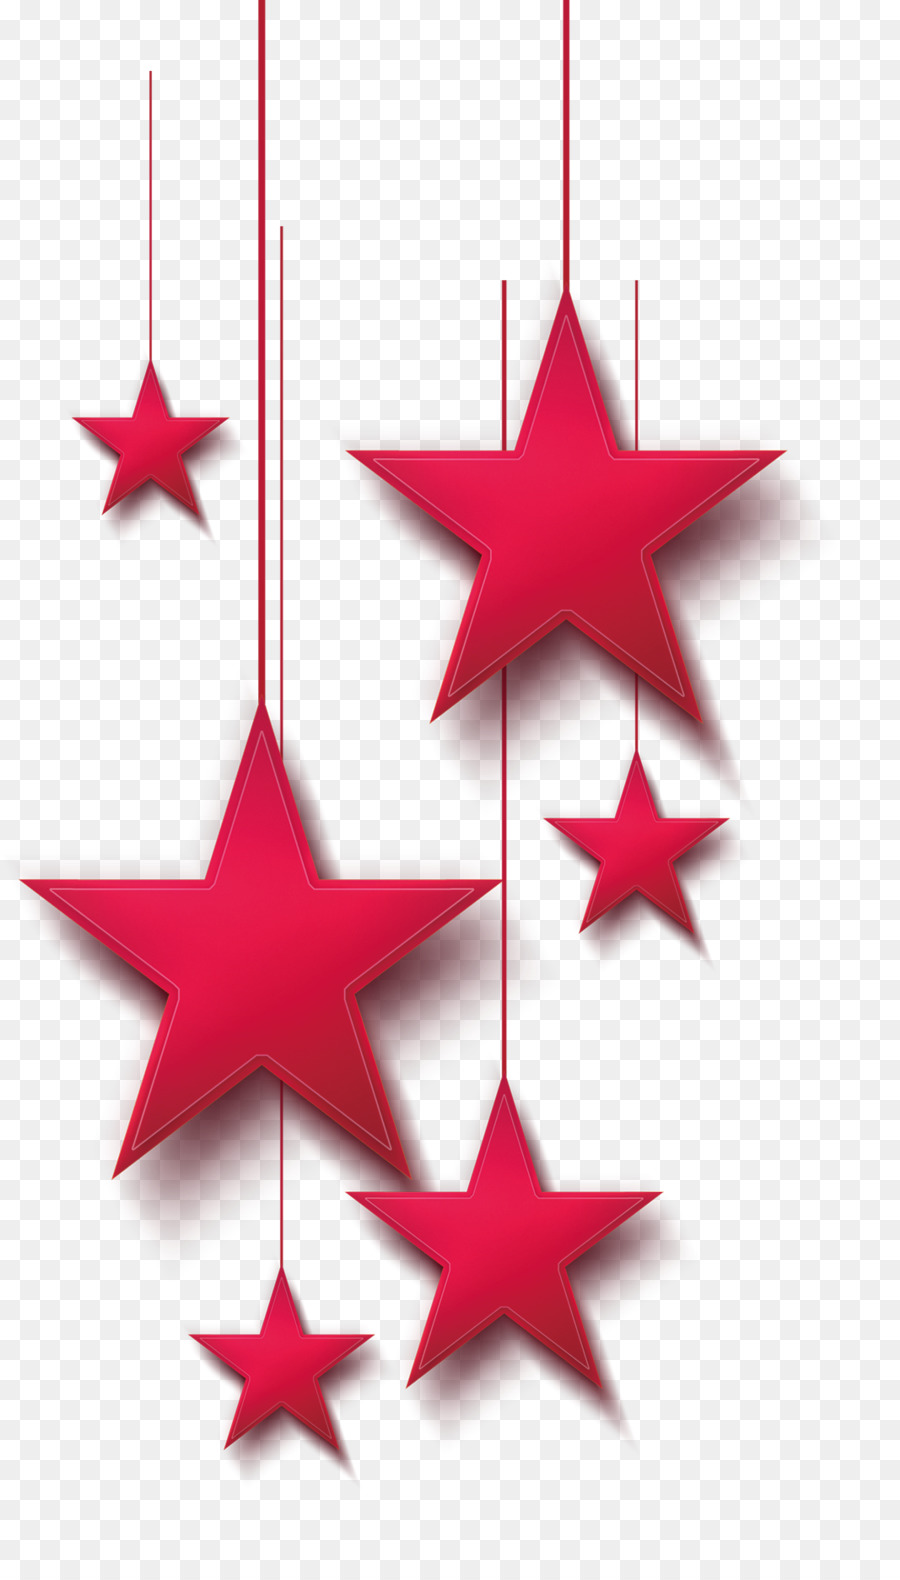 Red star Icon - Red Star png download - 1067*1854 - Free Transparent Star png Download.